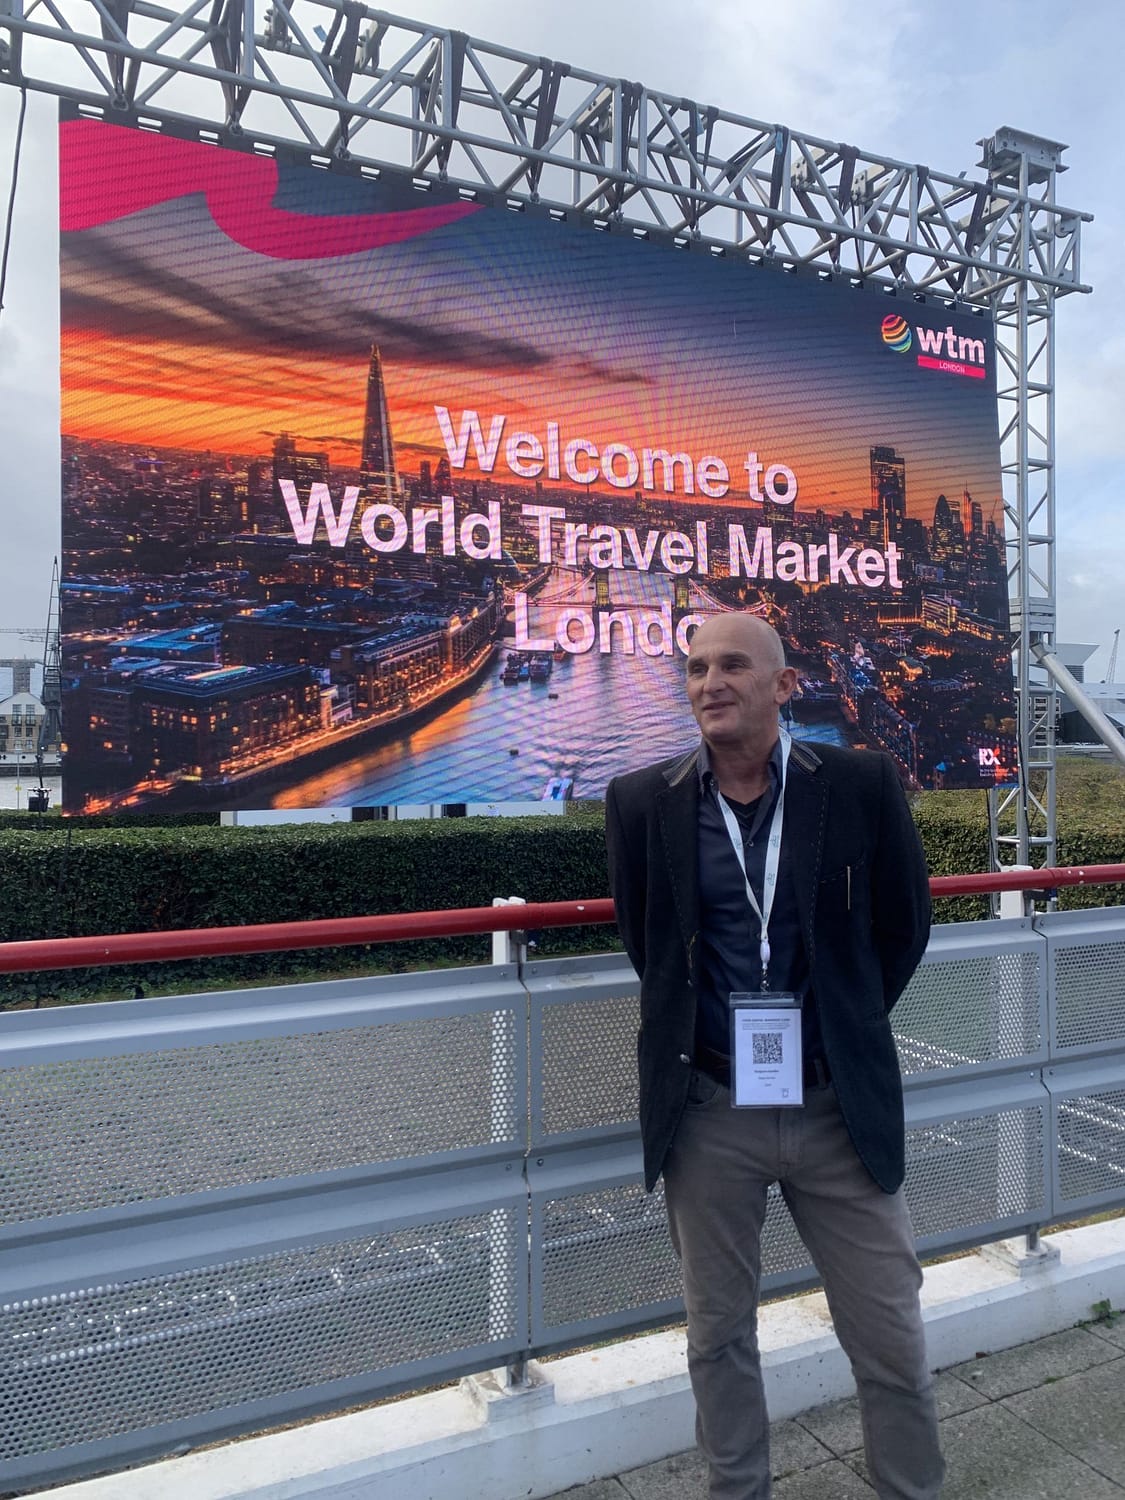 Meet the Sea attends the World Travel market 2022 show in London